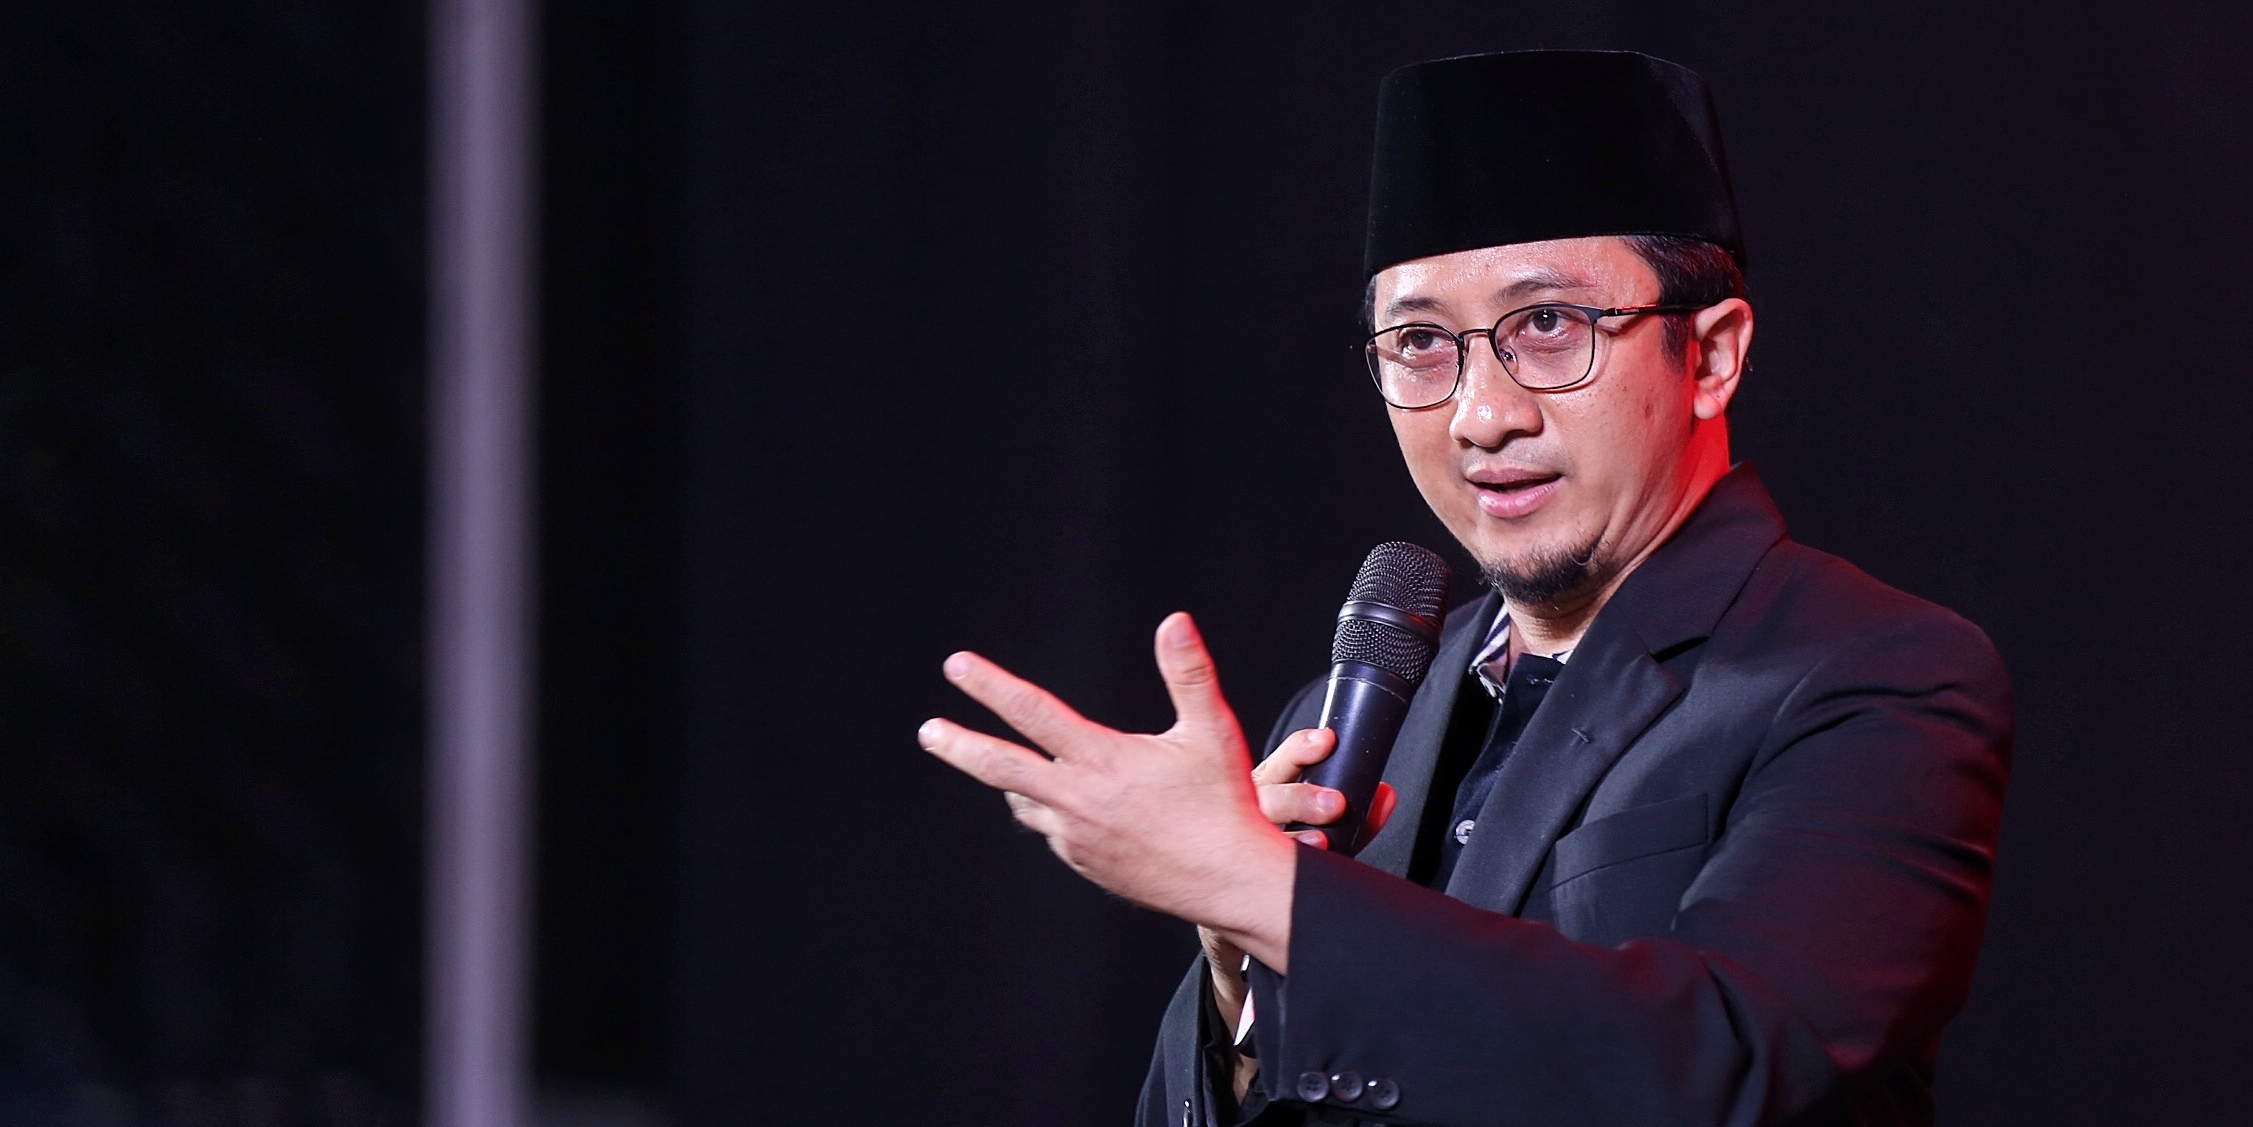 Fatwa MUI on Friday Prayer at Home, Ustaz Yusuf Mansur Understands If There Are Differences